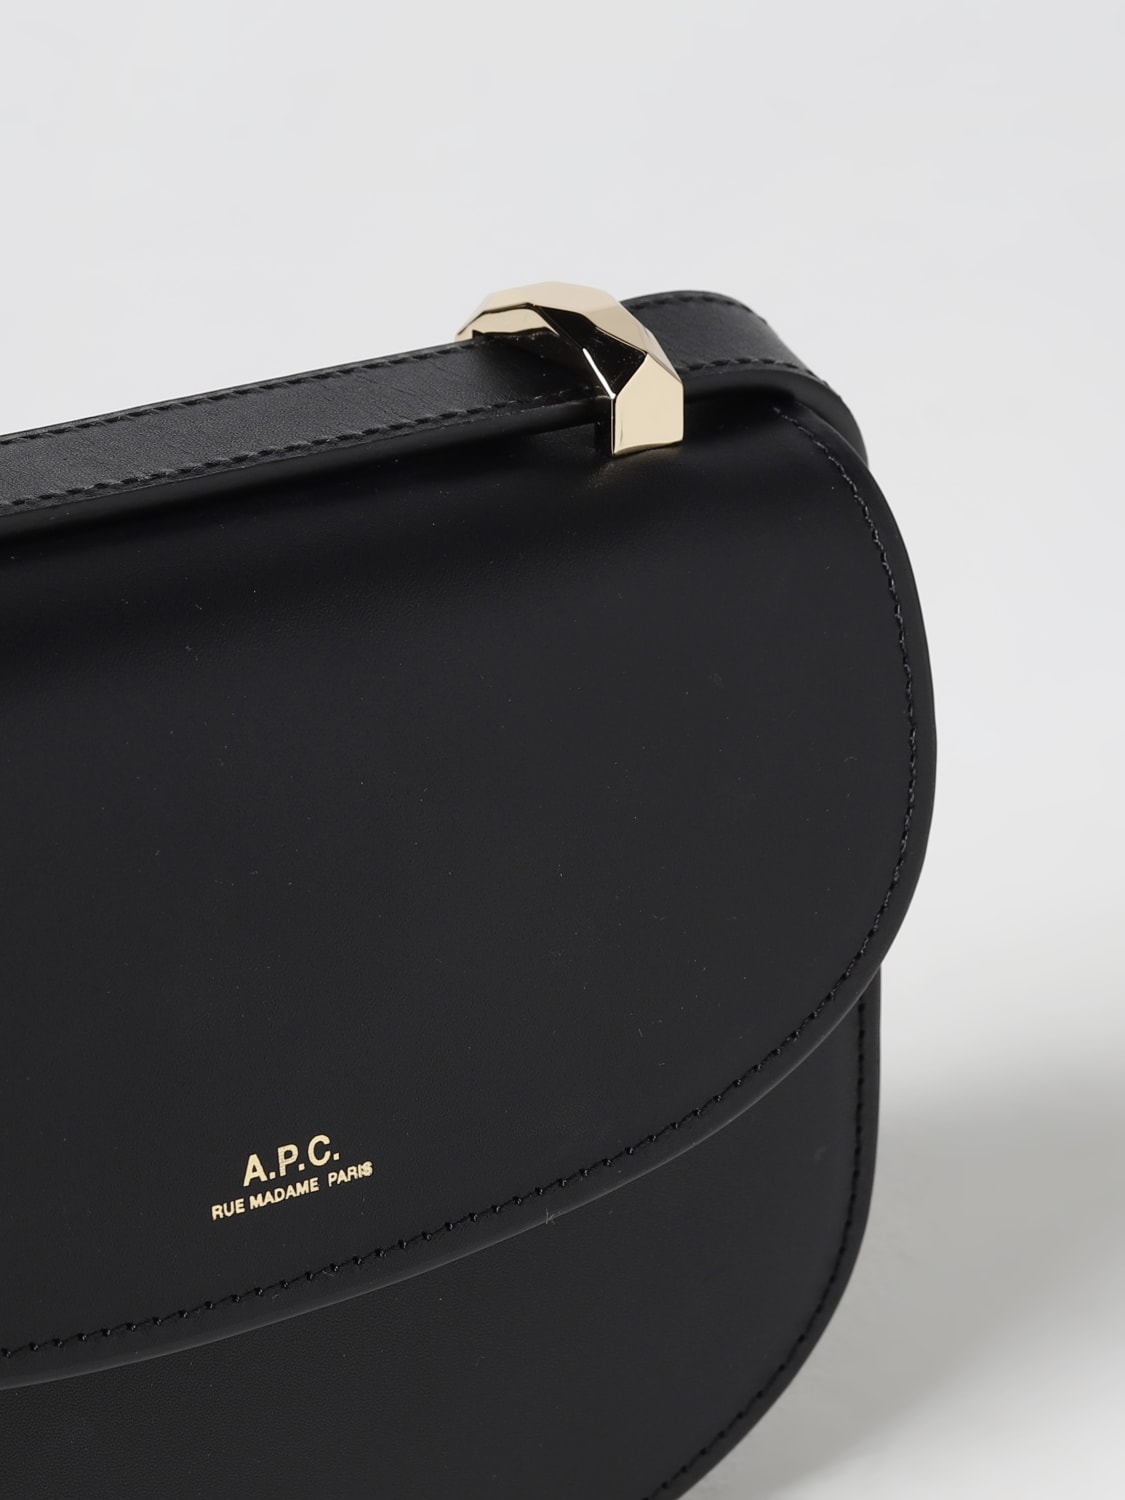 A.p.c. bags for Women